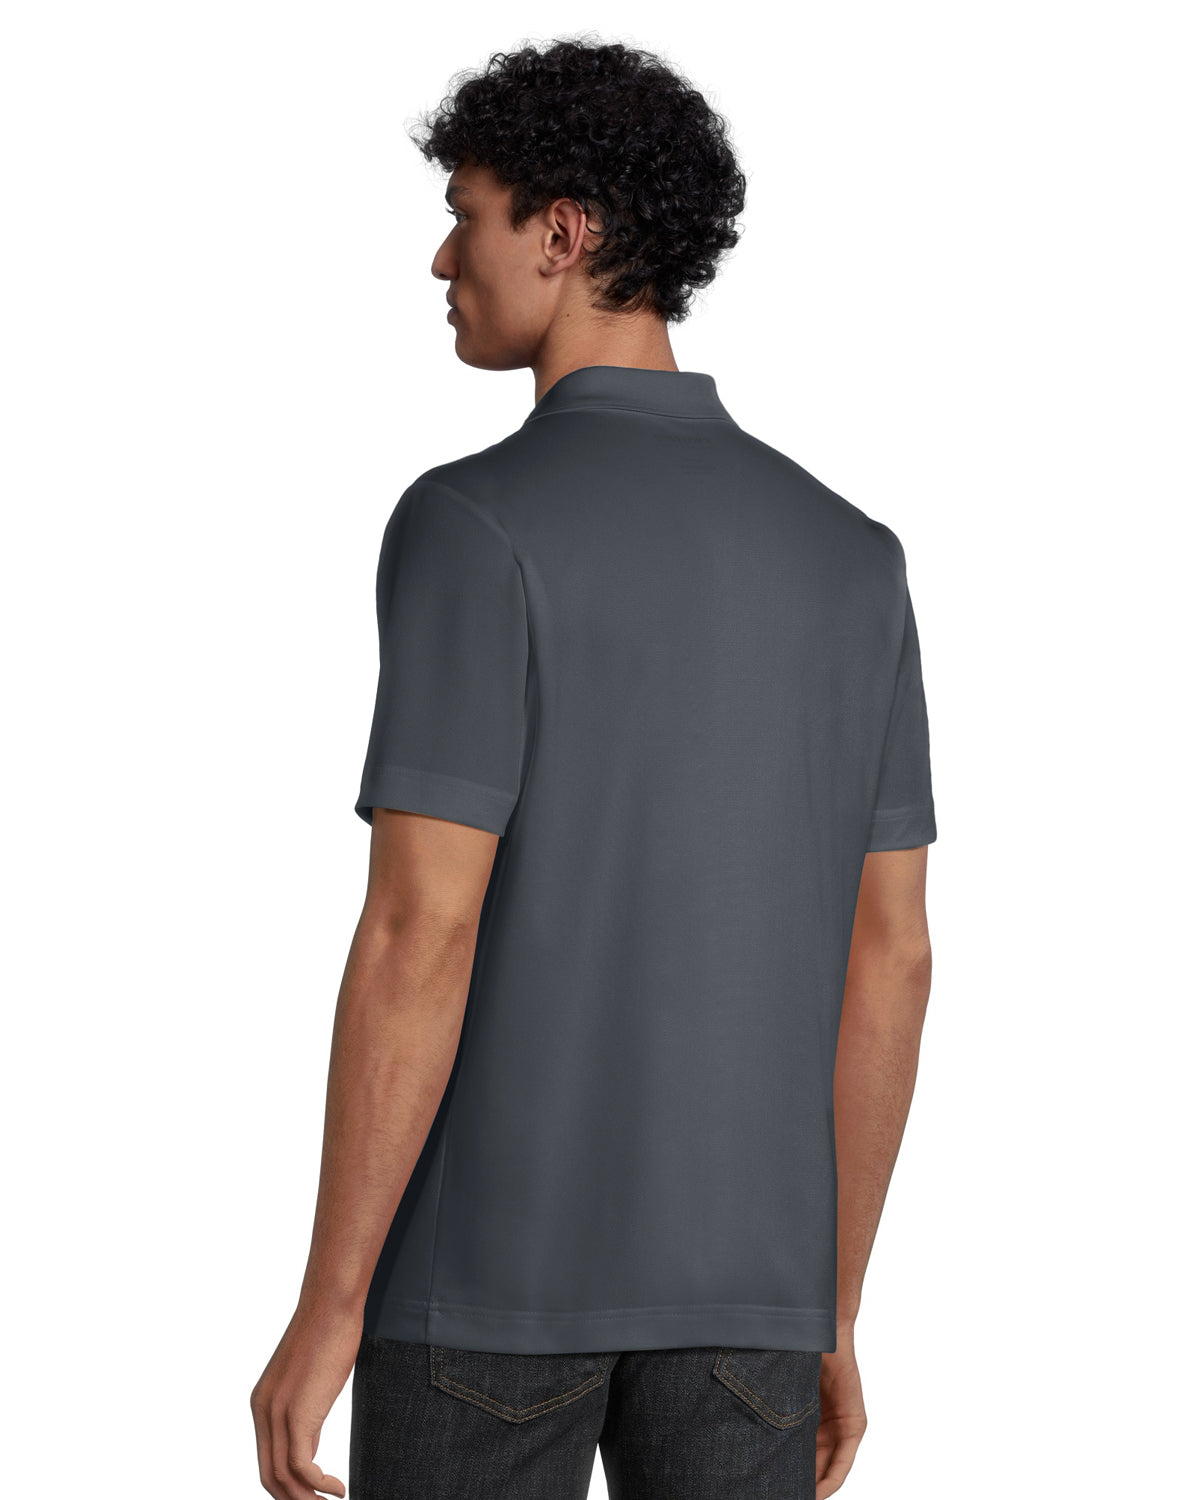 ICON Men's Tall Snag Proof Performance Polo